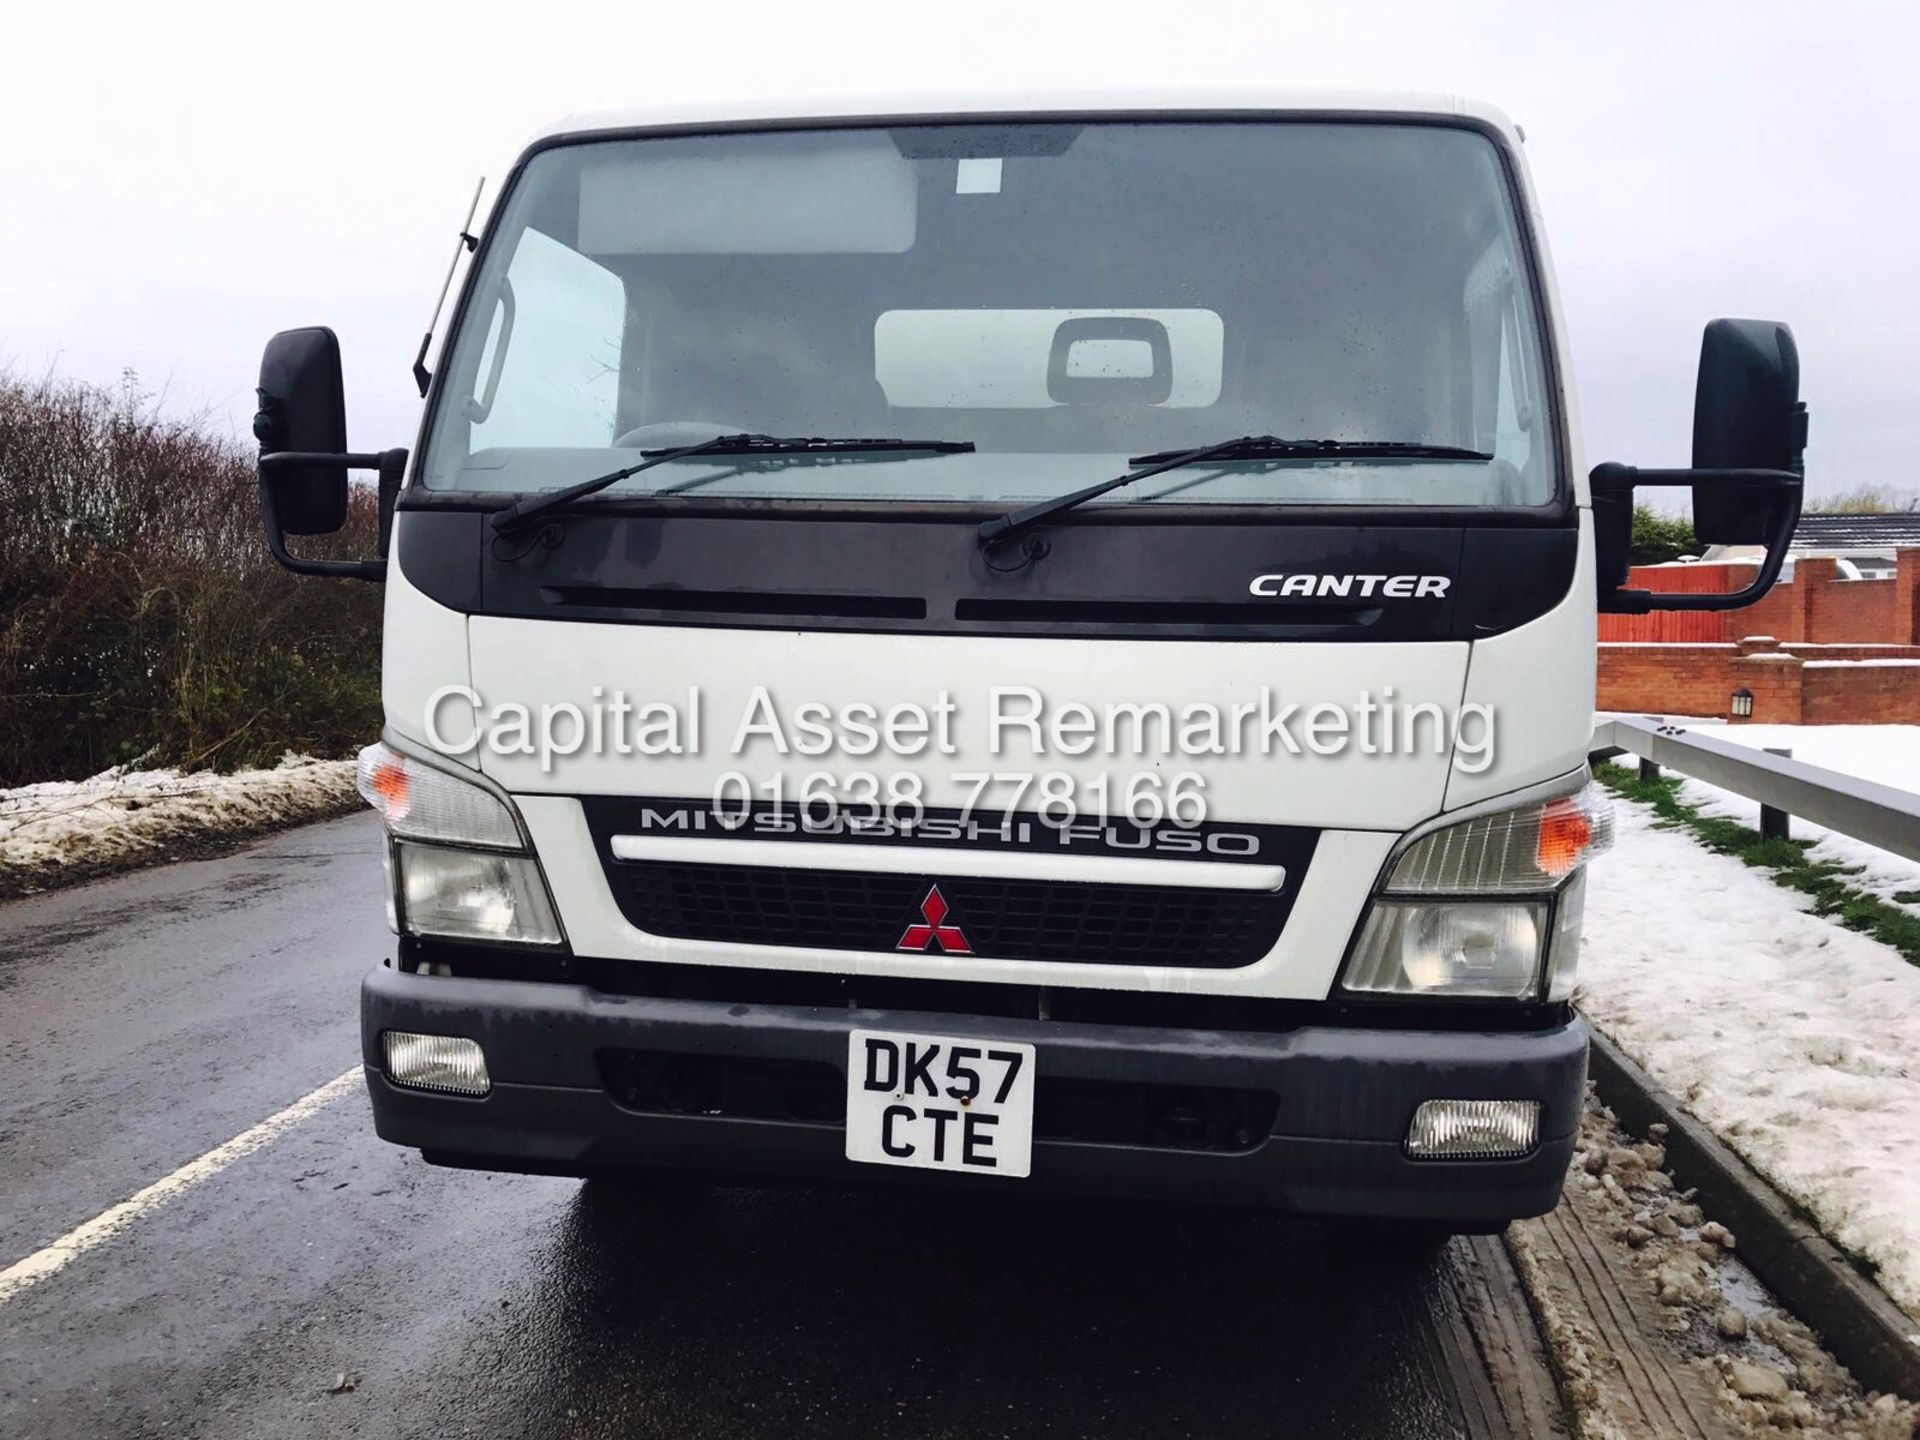 (ON SALE) MITSUBISHI FUSO CANTER 7C18 (2008 MODEL) 15FT LWB ***1 OWNER - ONLY 40,000 MILES FSH*** - Image 2 of 14